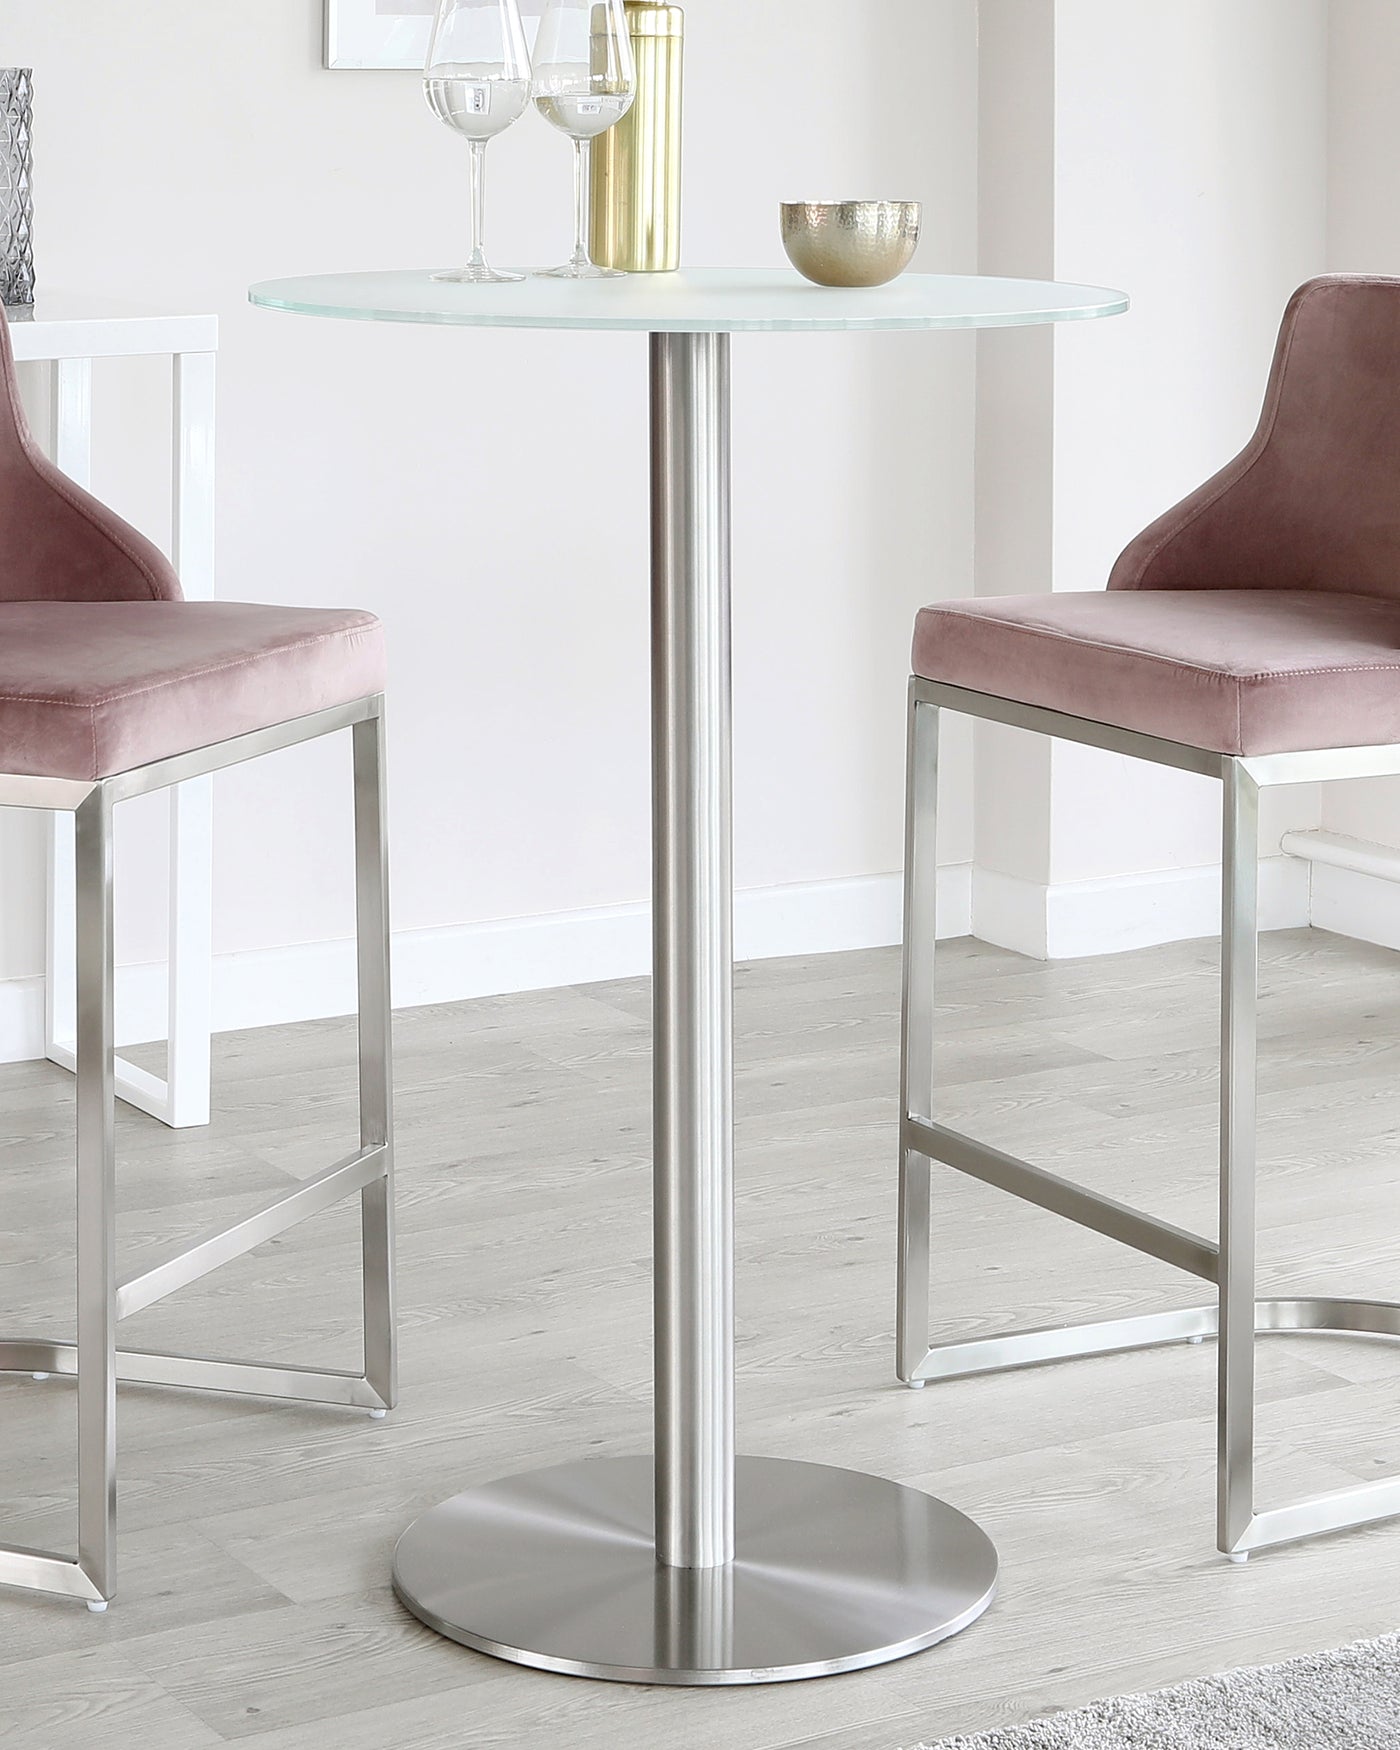 Round glass-top bistro table with a single central metal pedestal and a metal base, accompanied by two modern velvet-upholstered bar stools with metal legs.